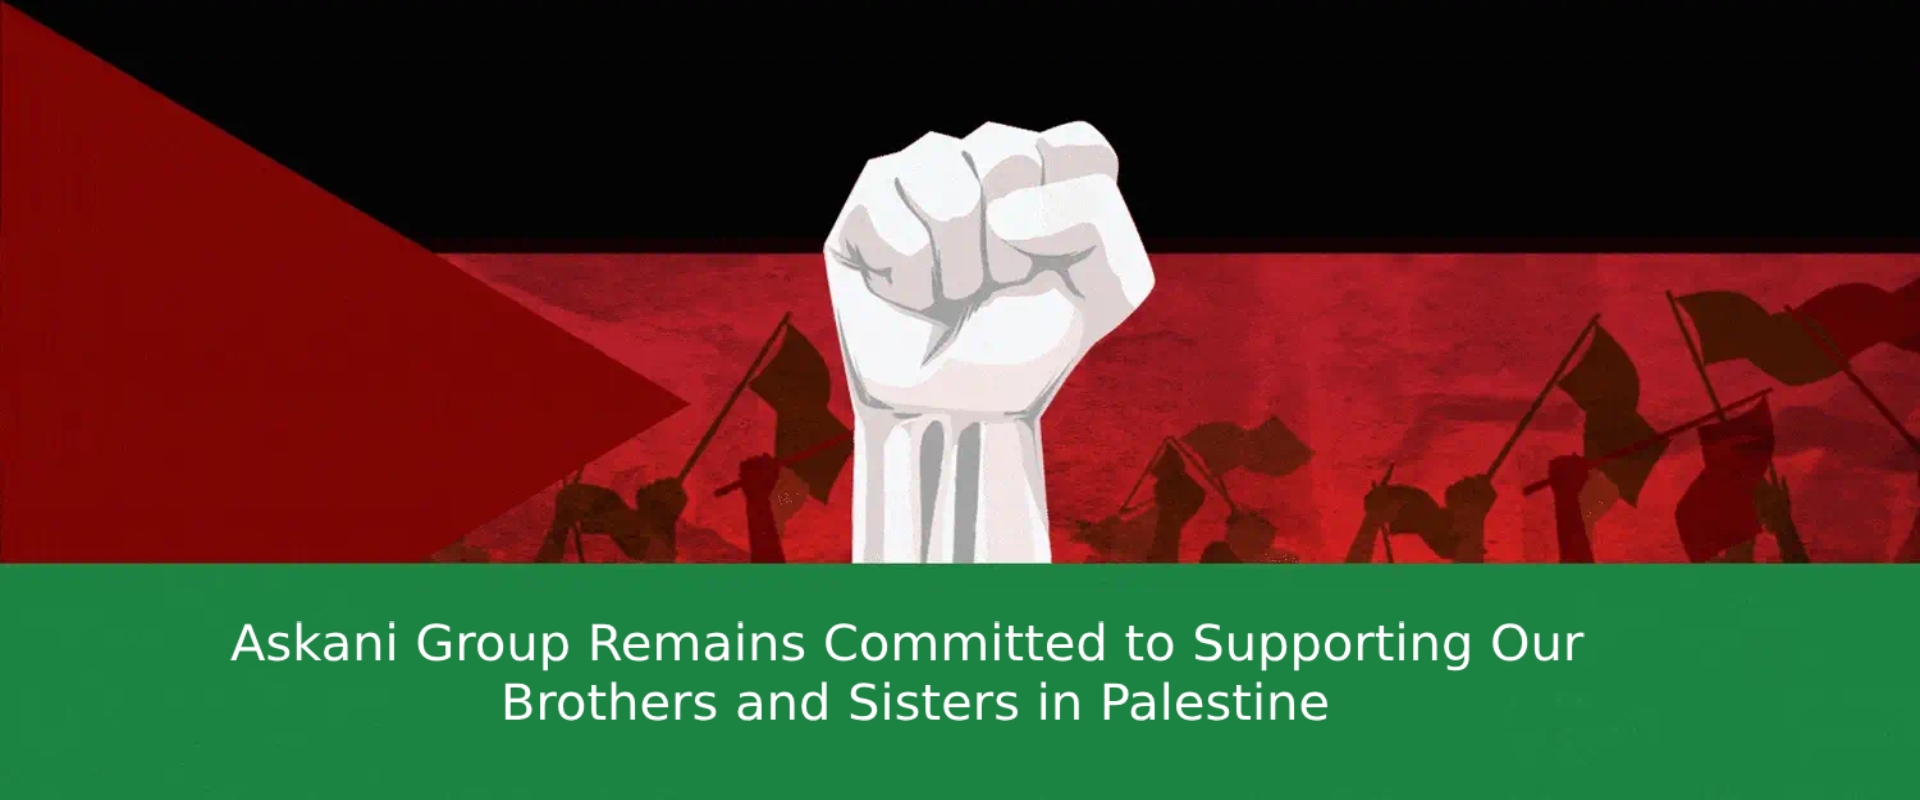 Askani Group Remains Committed to Supporting Our Brothers and Sisters in Palestine - Main Banner